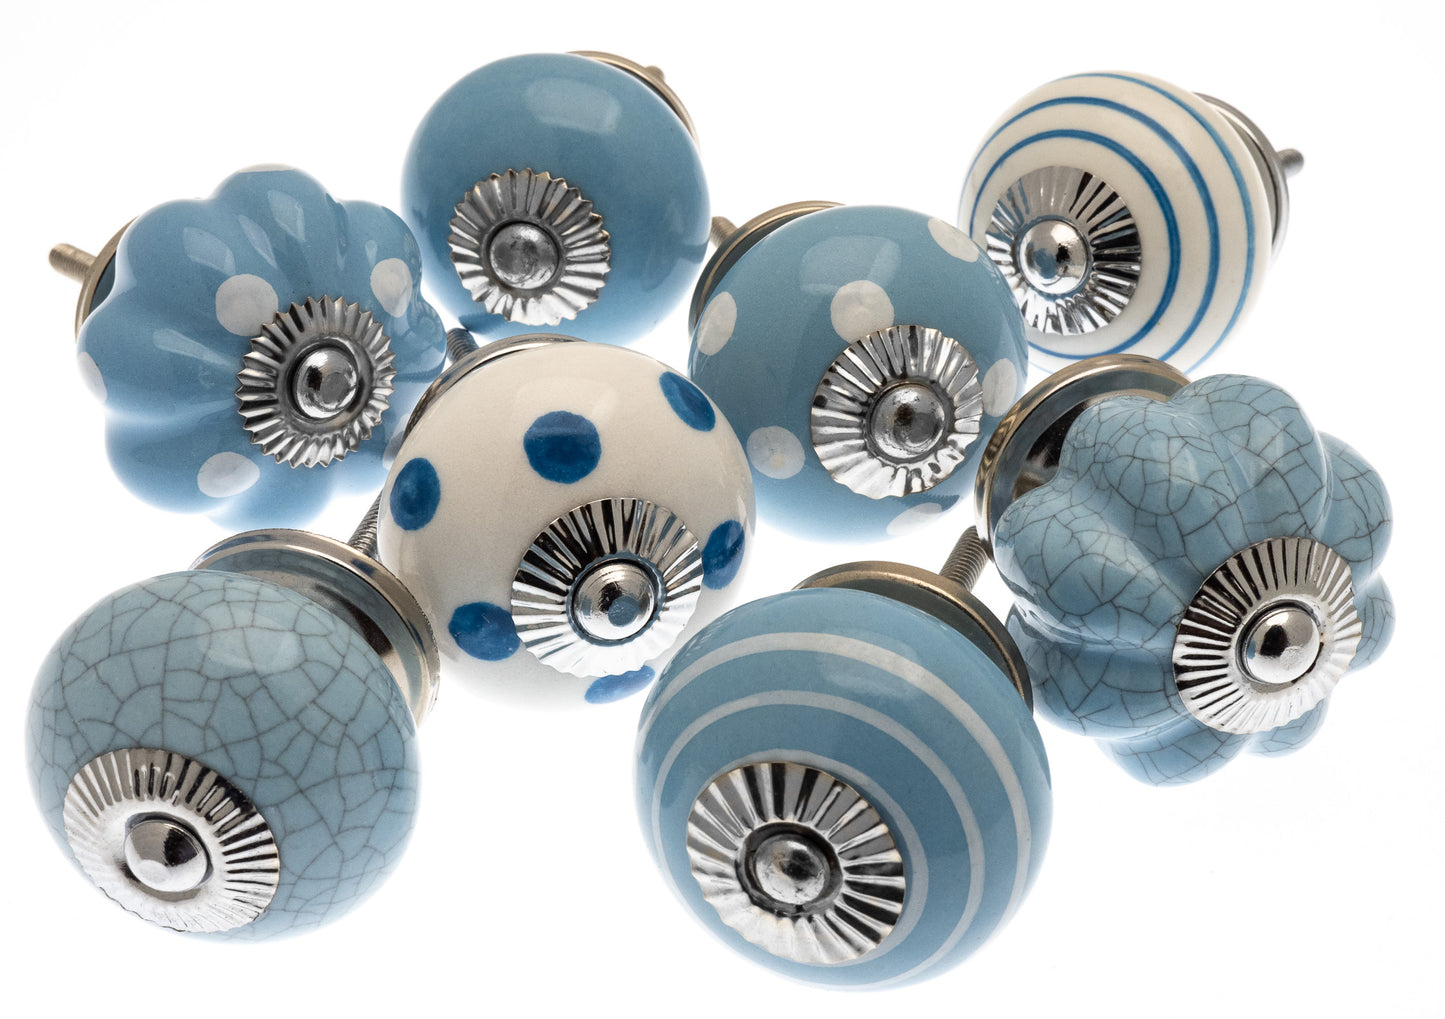 Ceramic Door Knobs in Pale Blue with Round and Flower Shape Designs  (Set of 8)